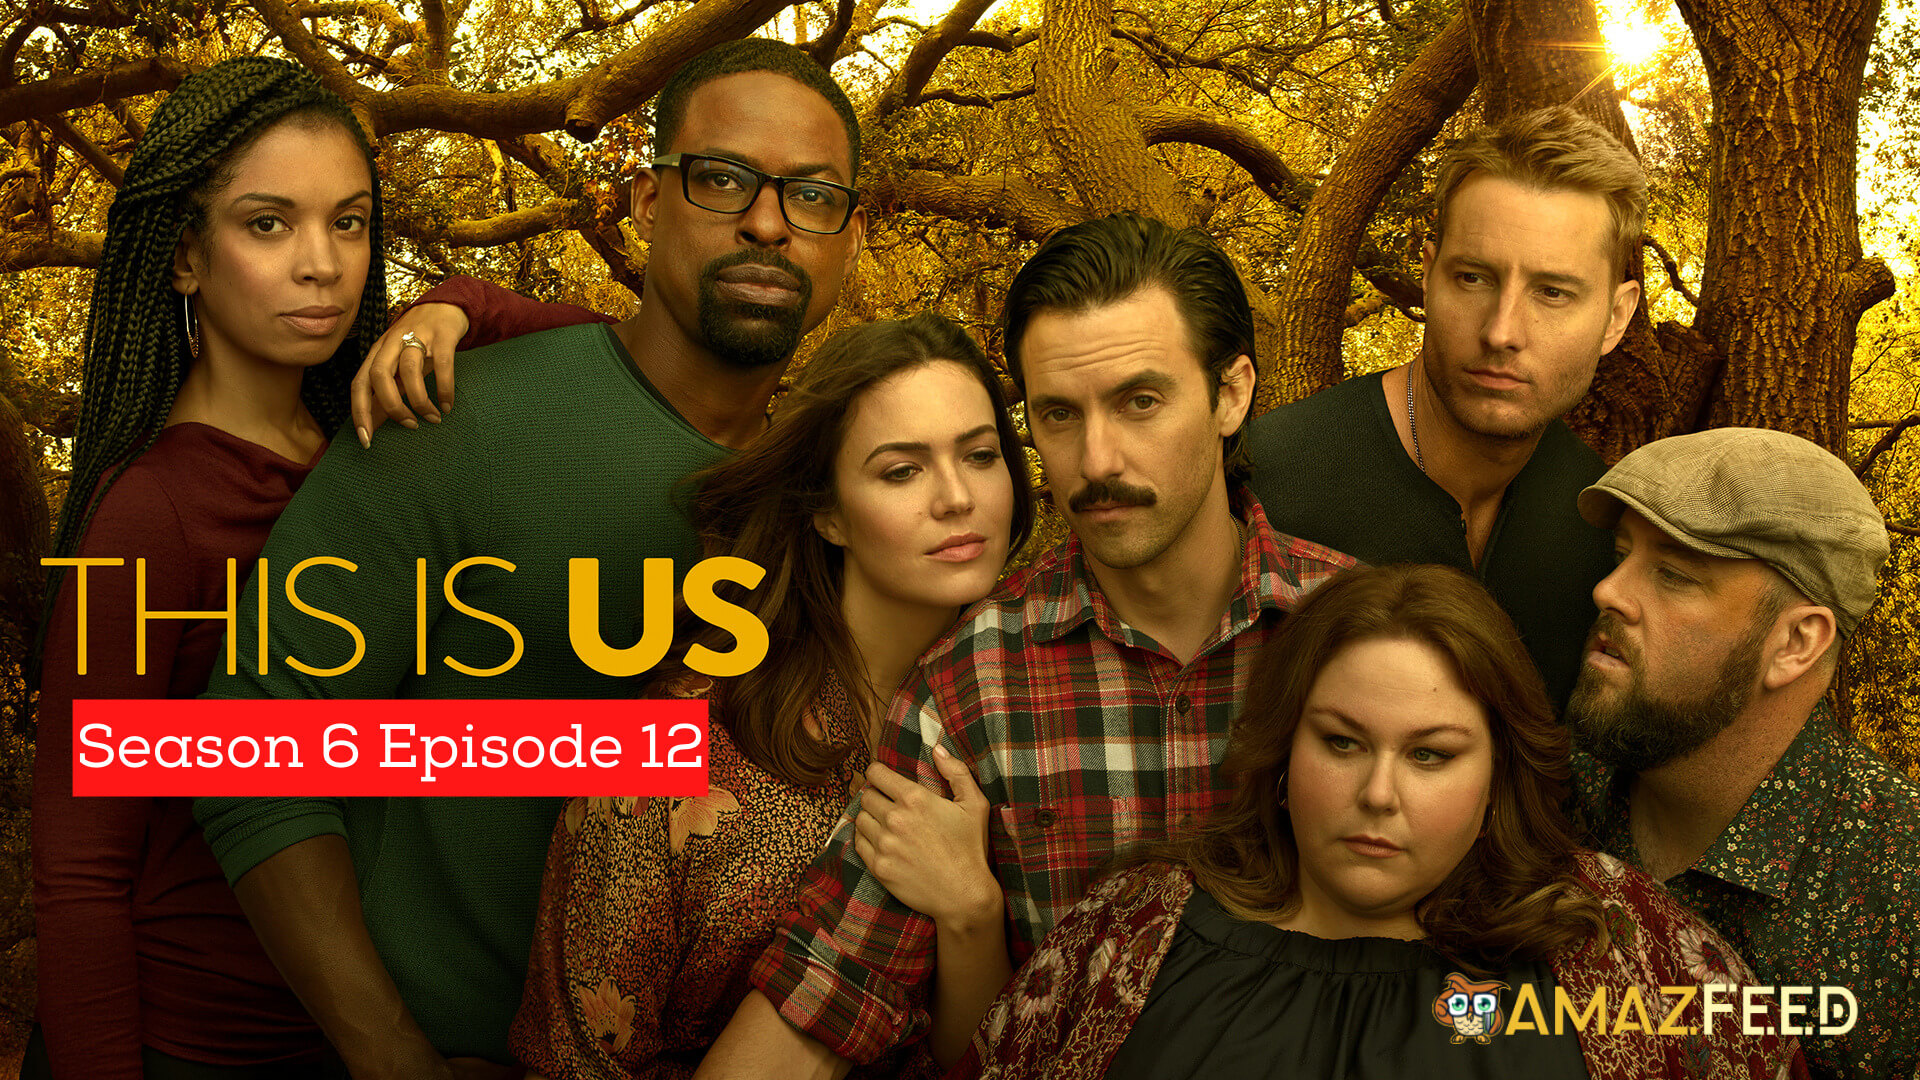 This Is Us Season 6 Episode 12 Release Date